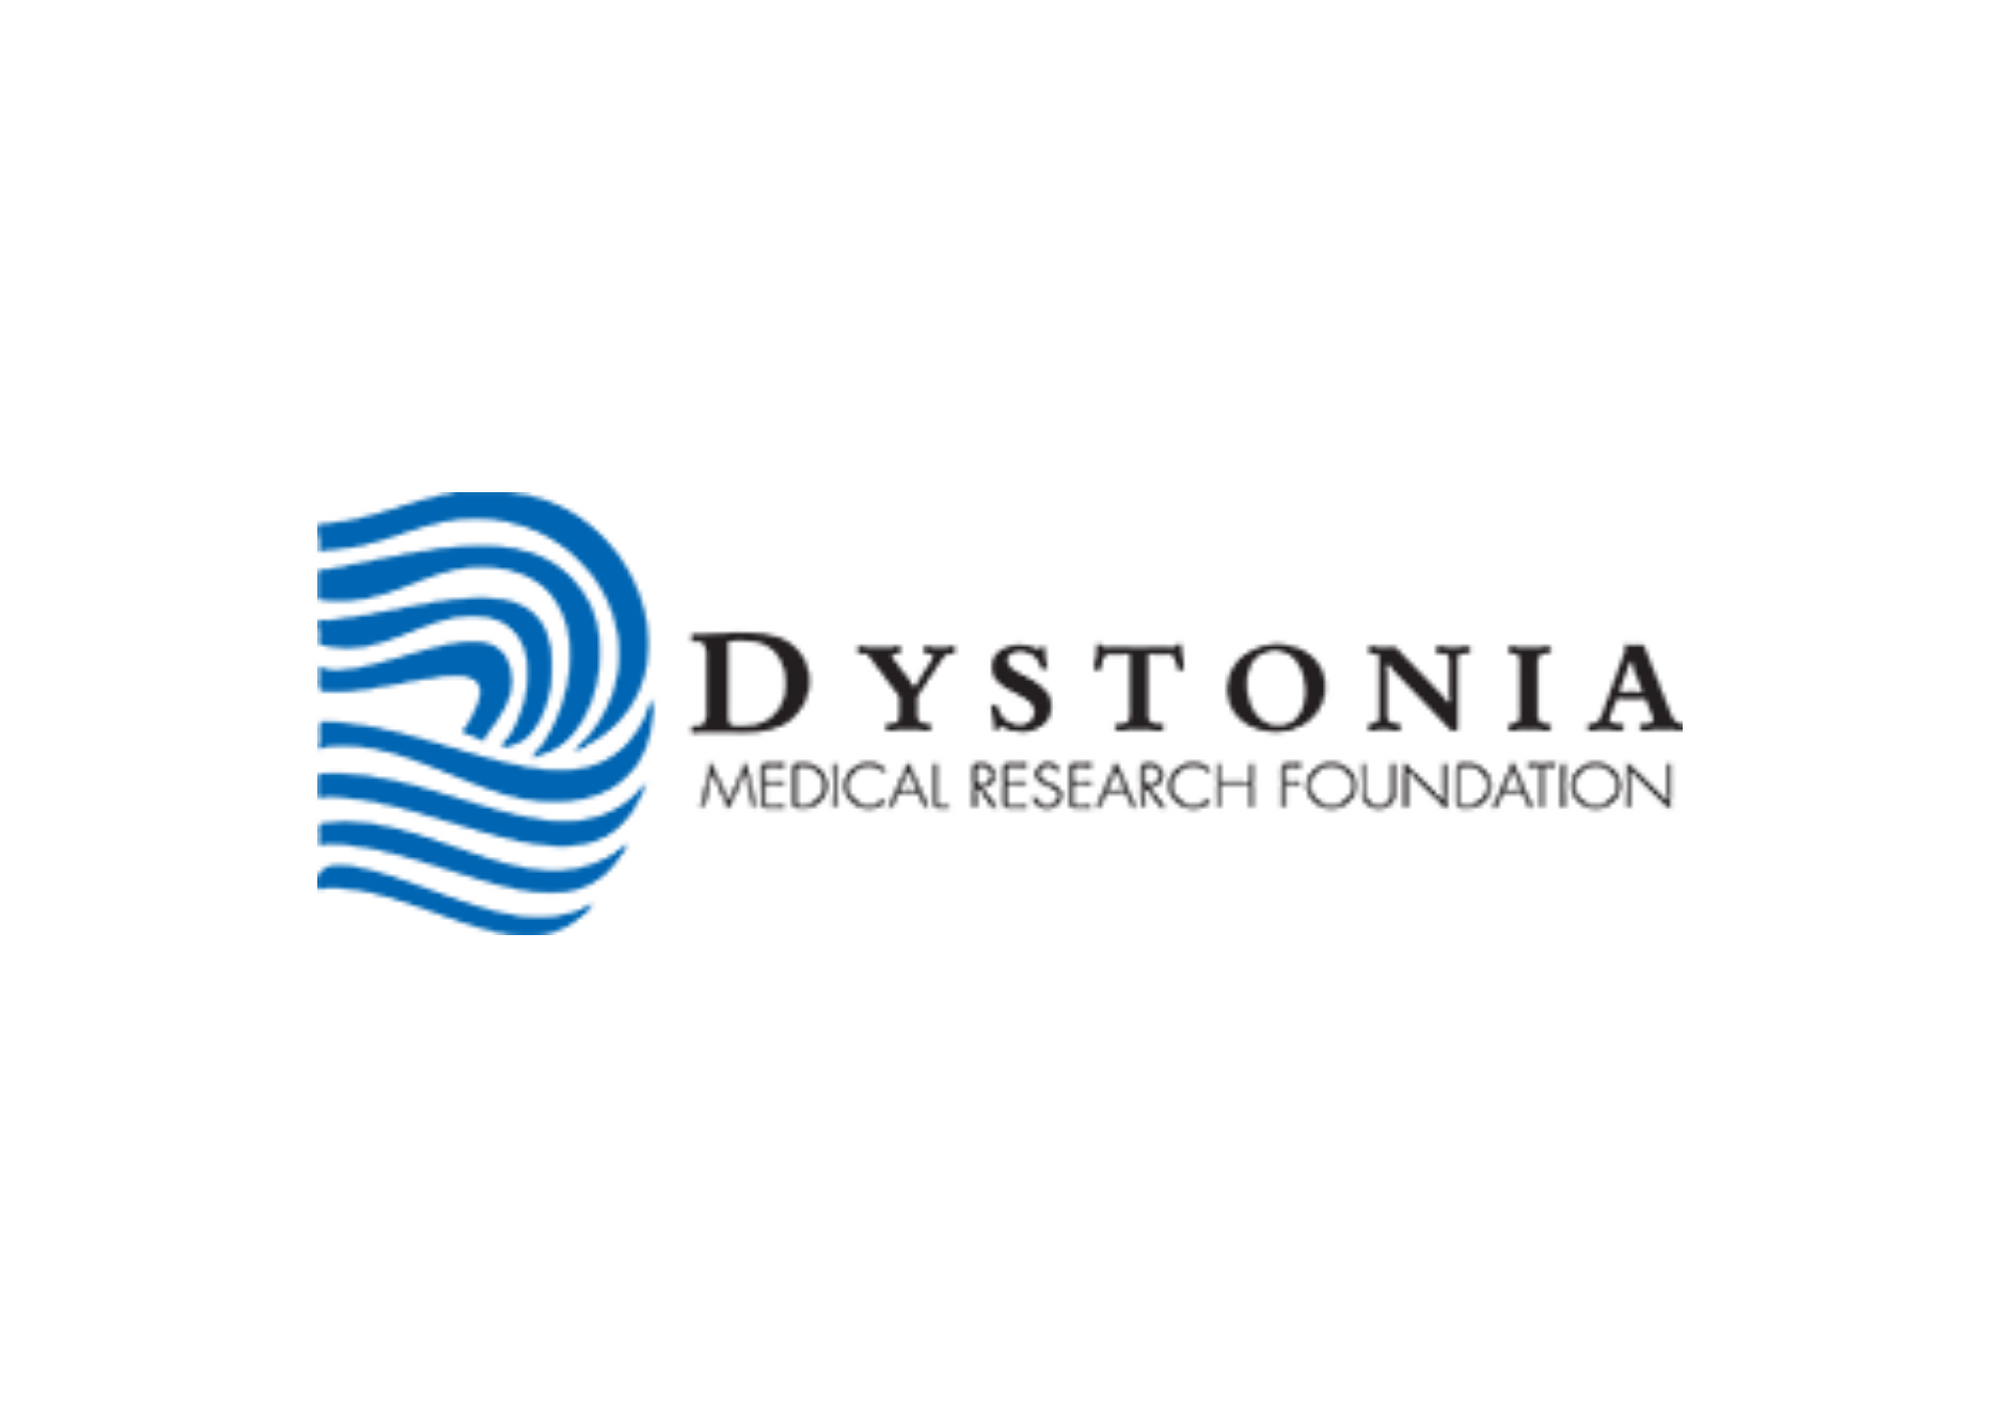 Dystonia Medical Research Foundation Logo